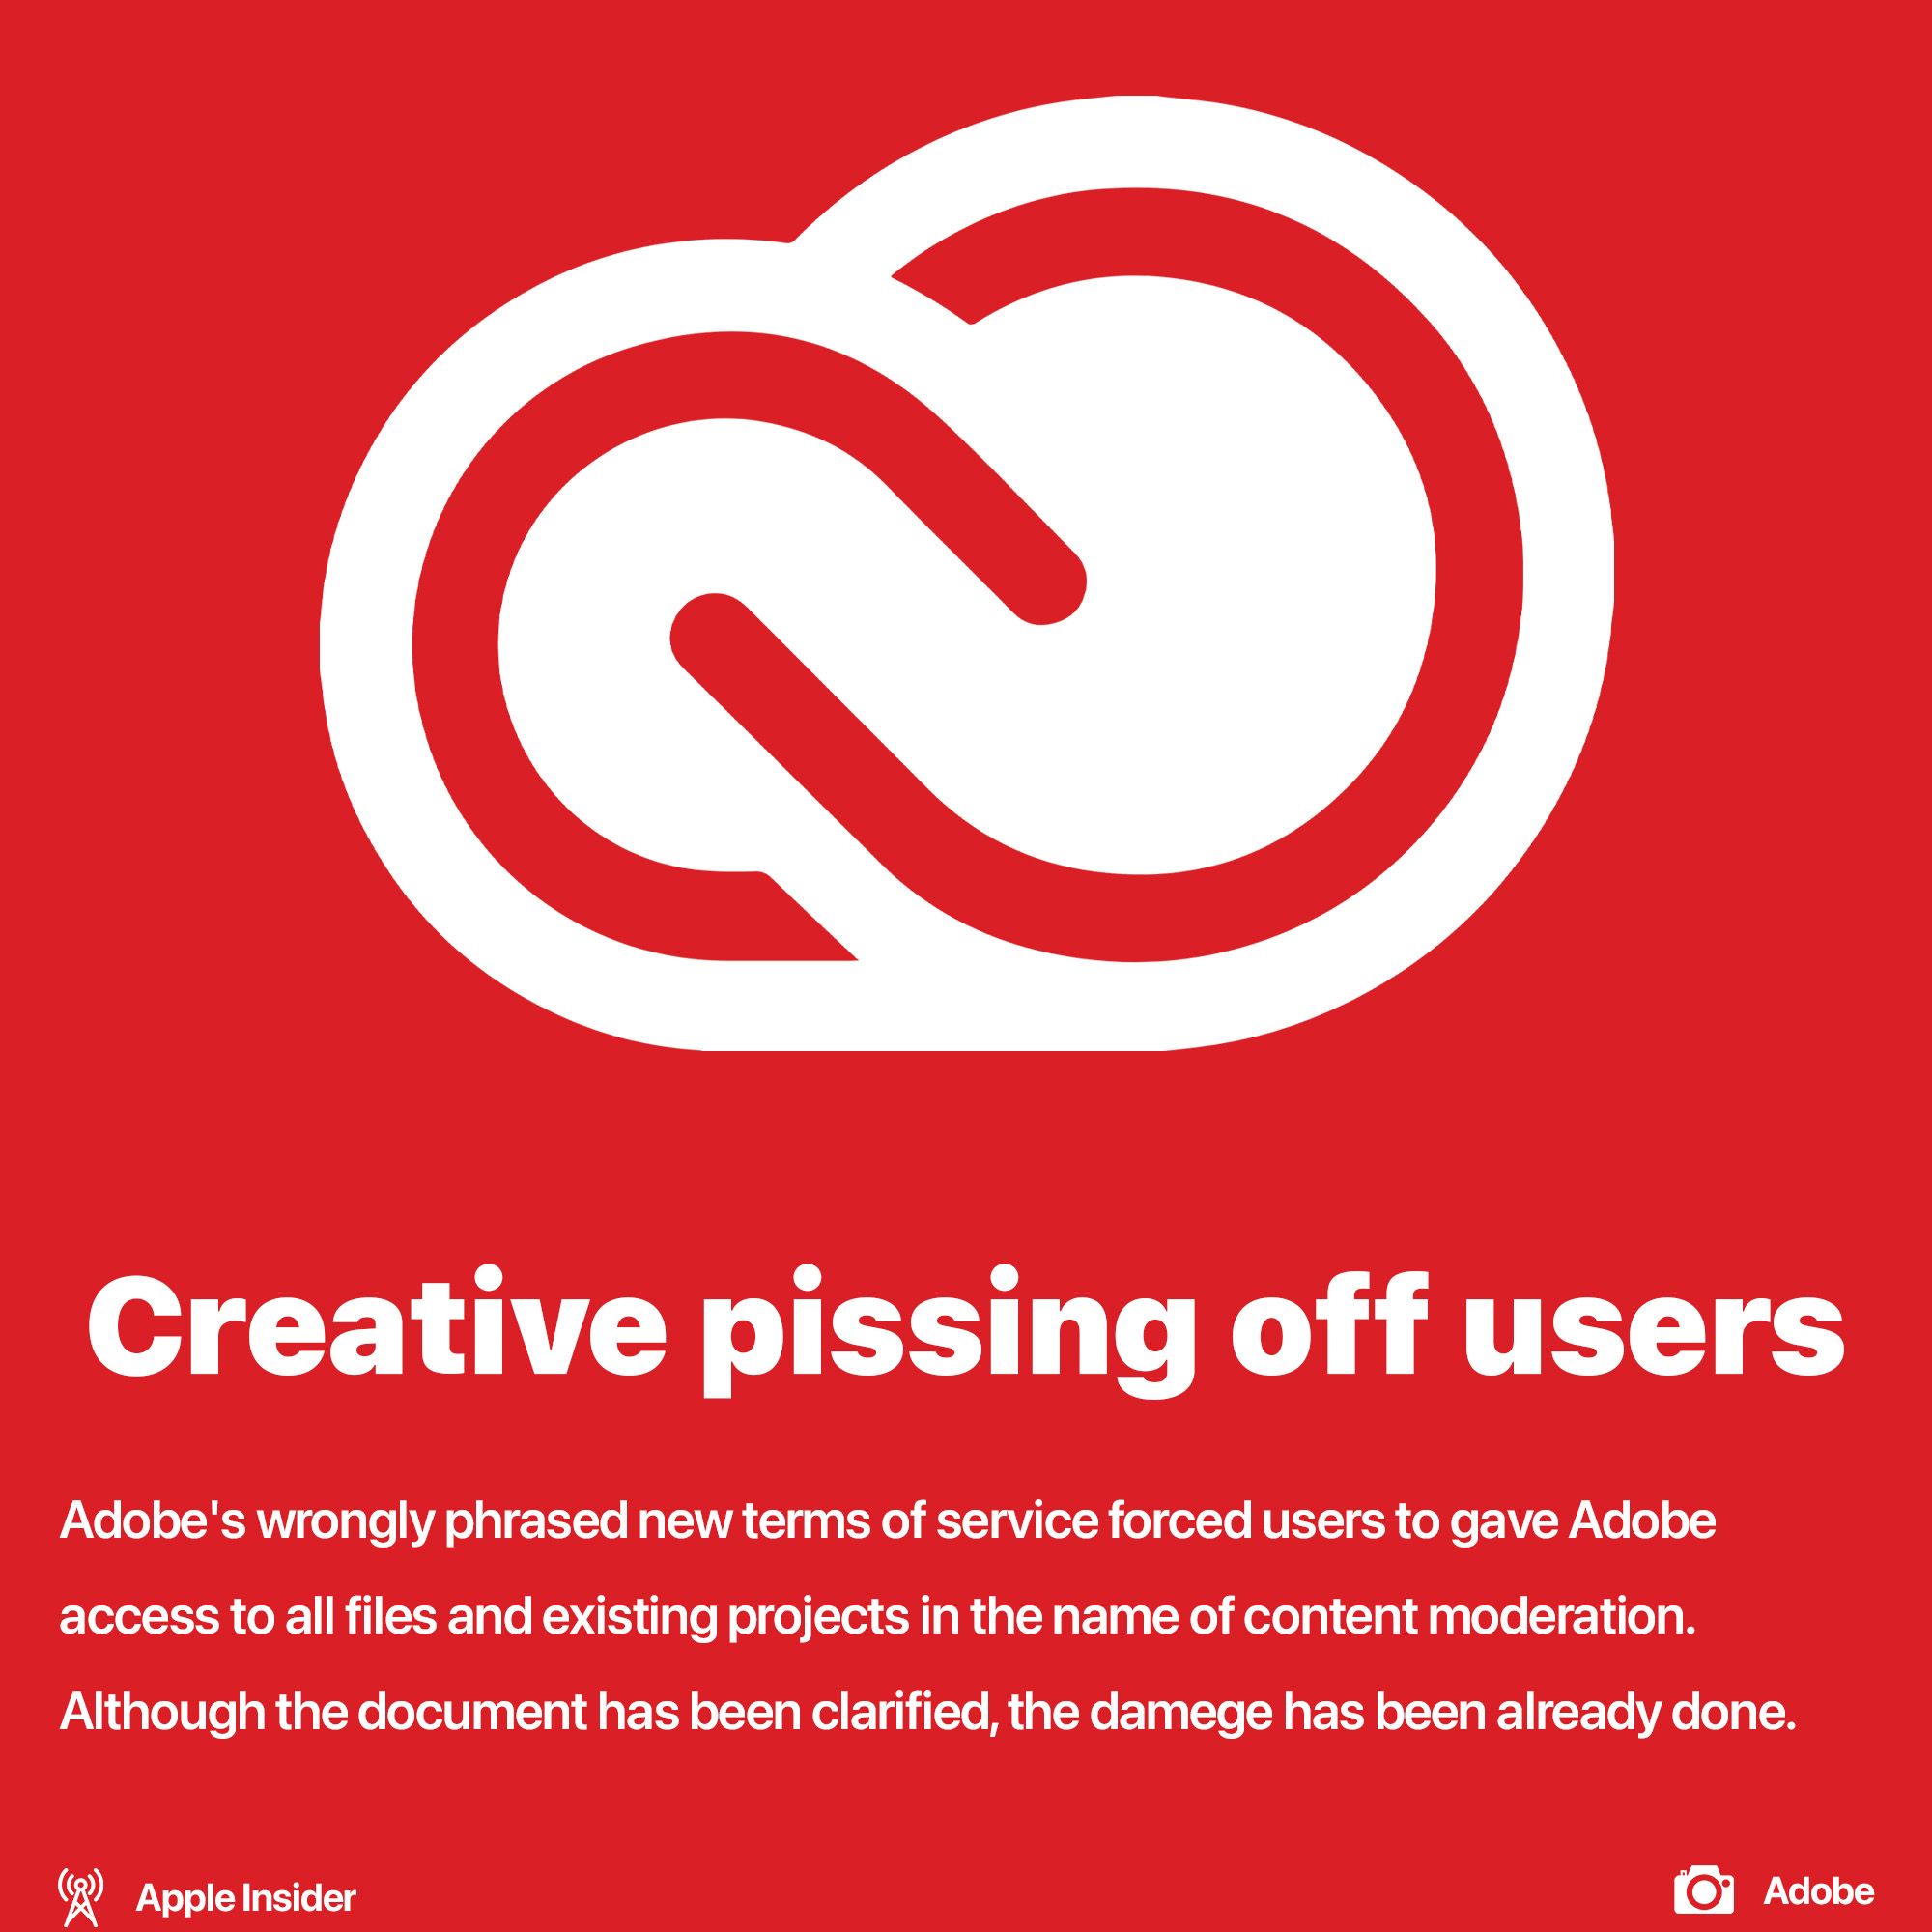 Adobe pissing off users